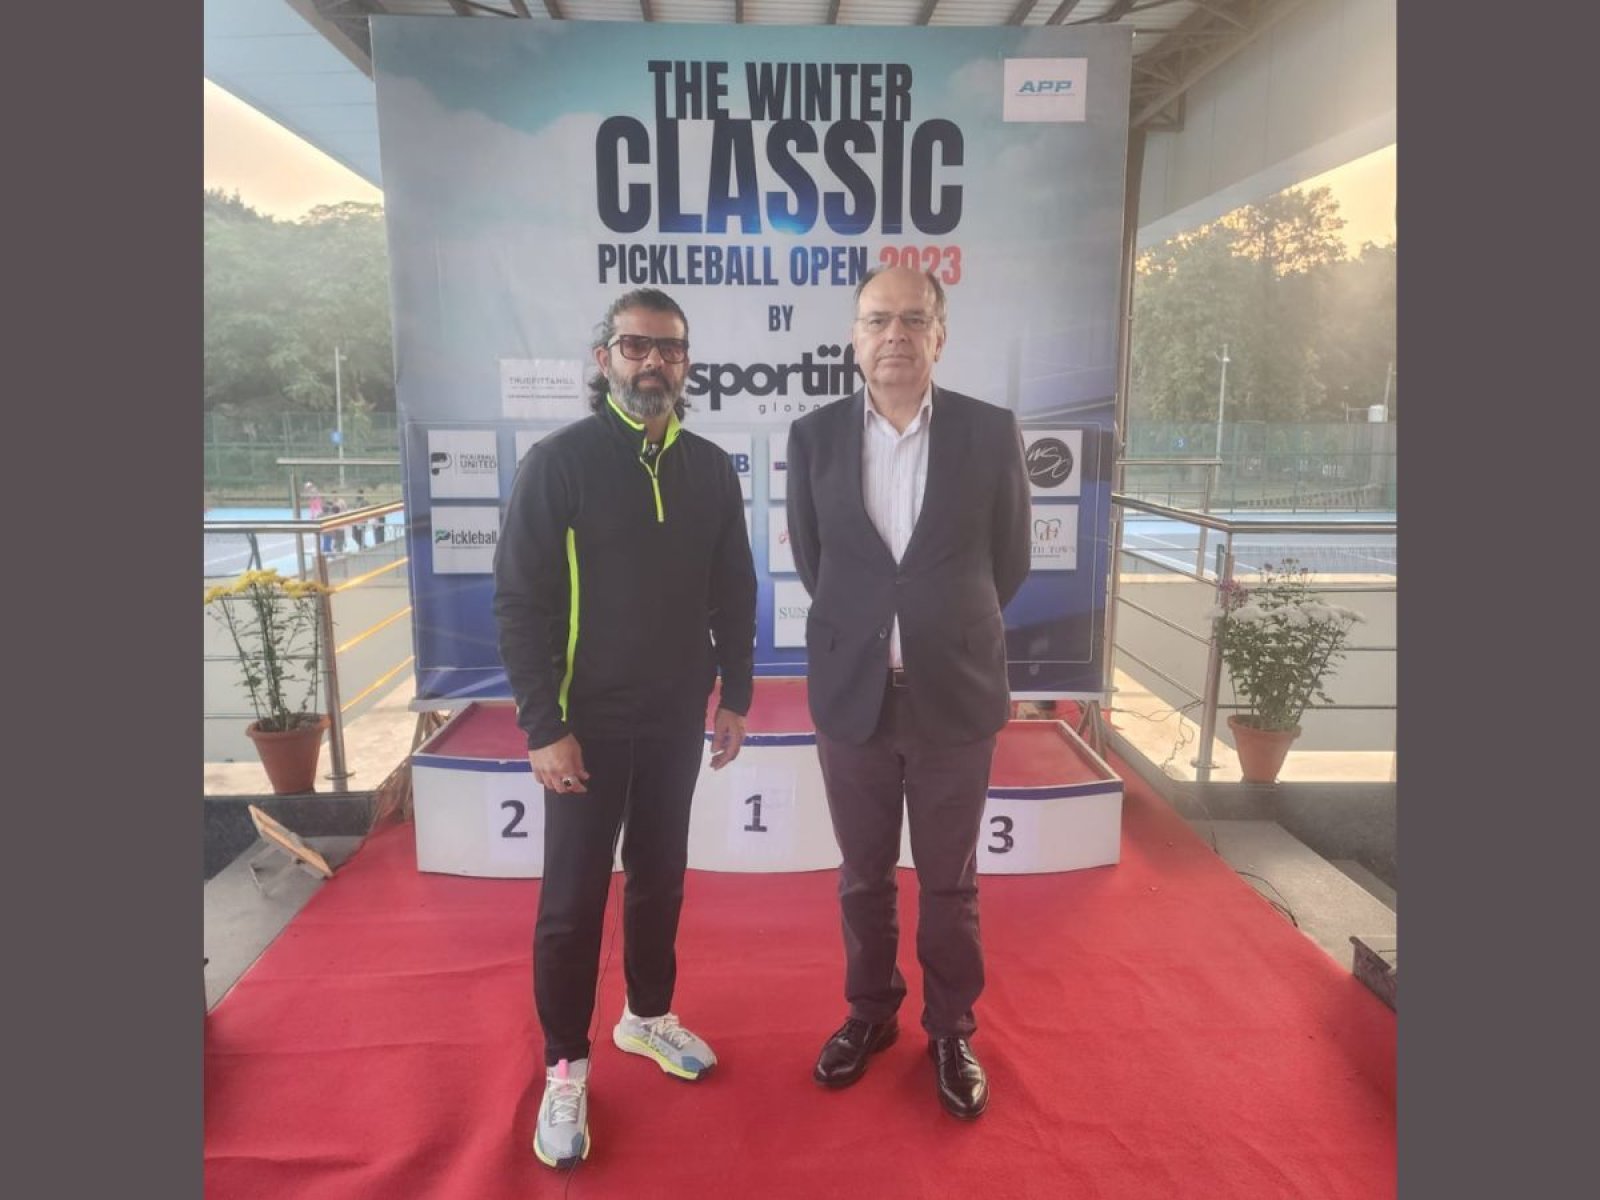 Thrilling Succеss at Thе Wintеr Classic Picklеball Opеn 2023 by Sportiify- A Rеsounding 300 plus Surgе in Participation Across India